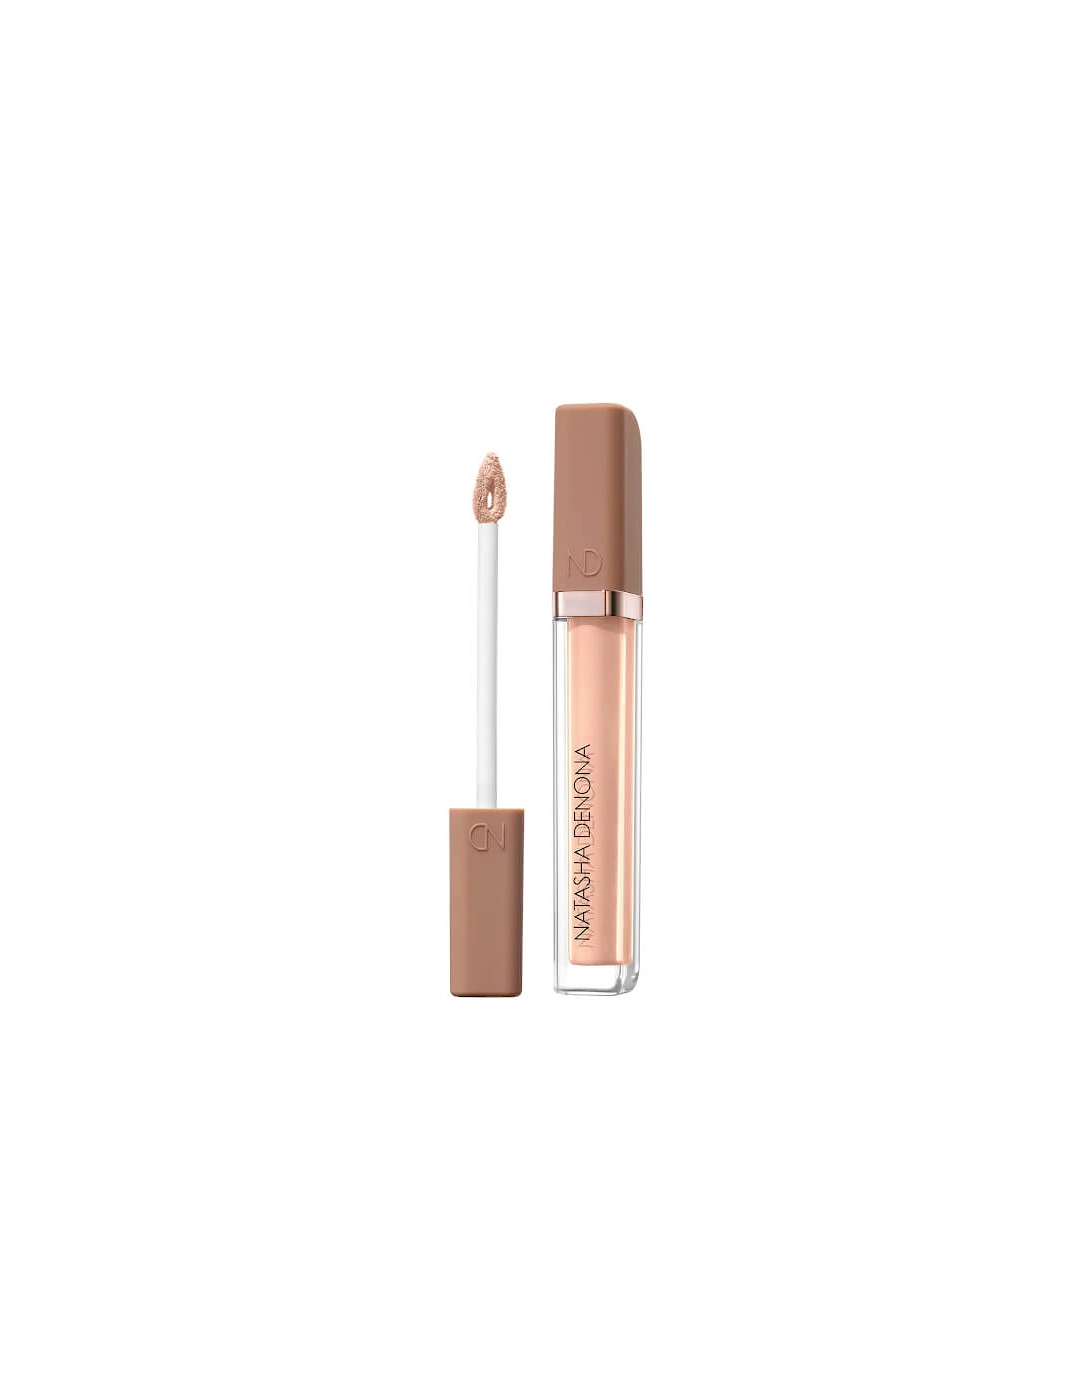 Hy-Glam Concealer - P2, 2 of 1